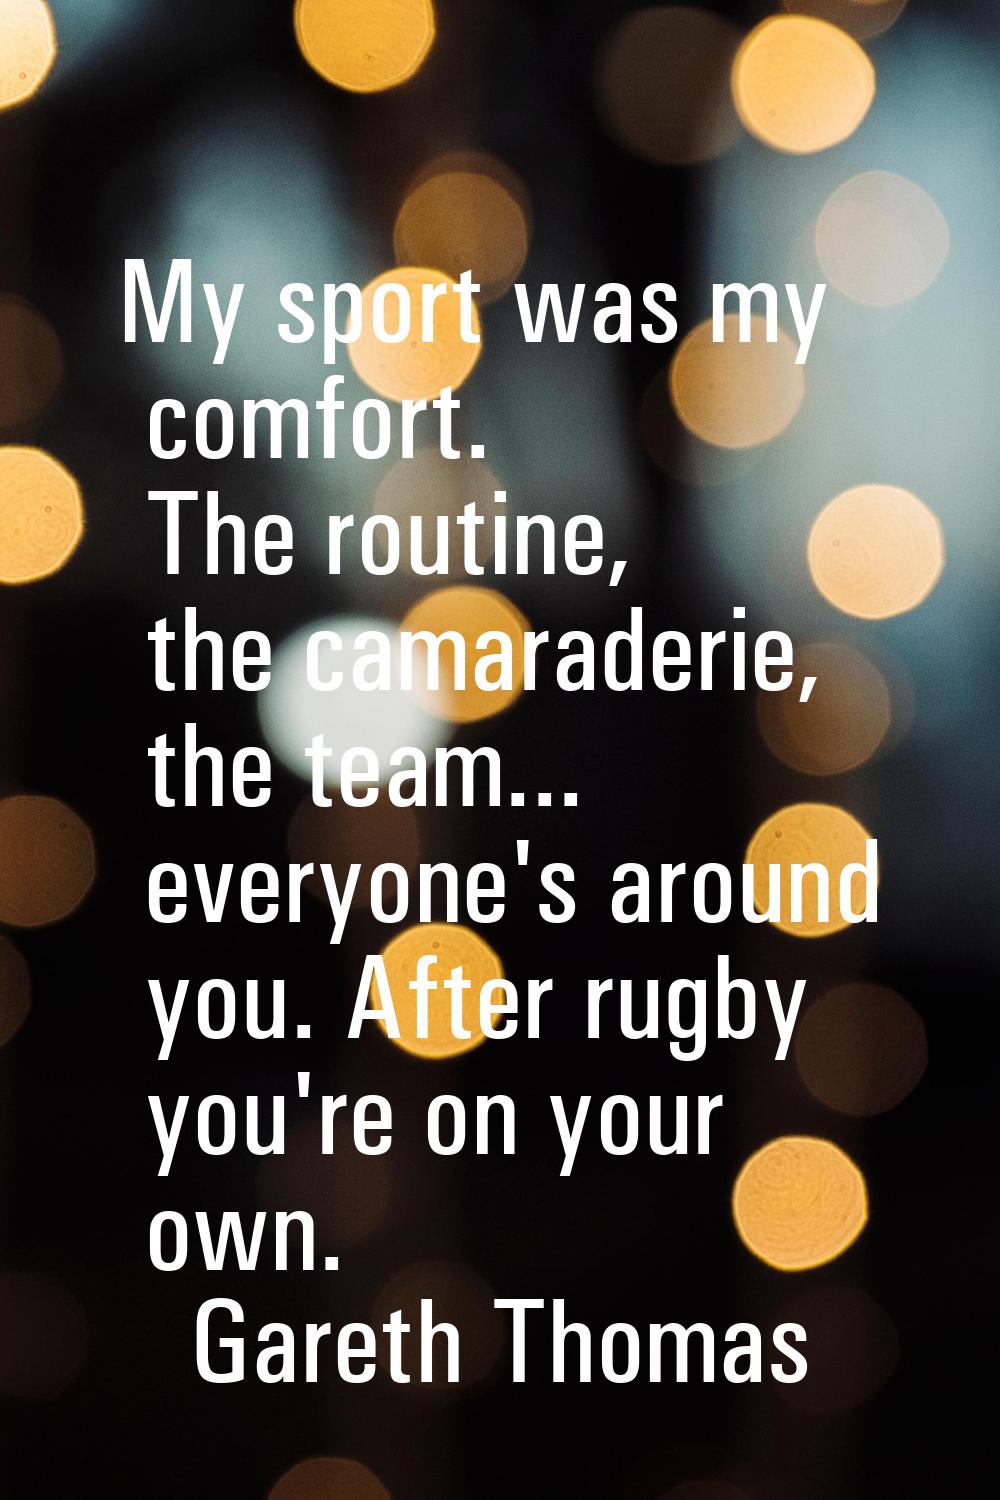 My sport was my comfort. The routine, the camaraderie, the team... everyone's around you. After rug